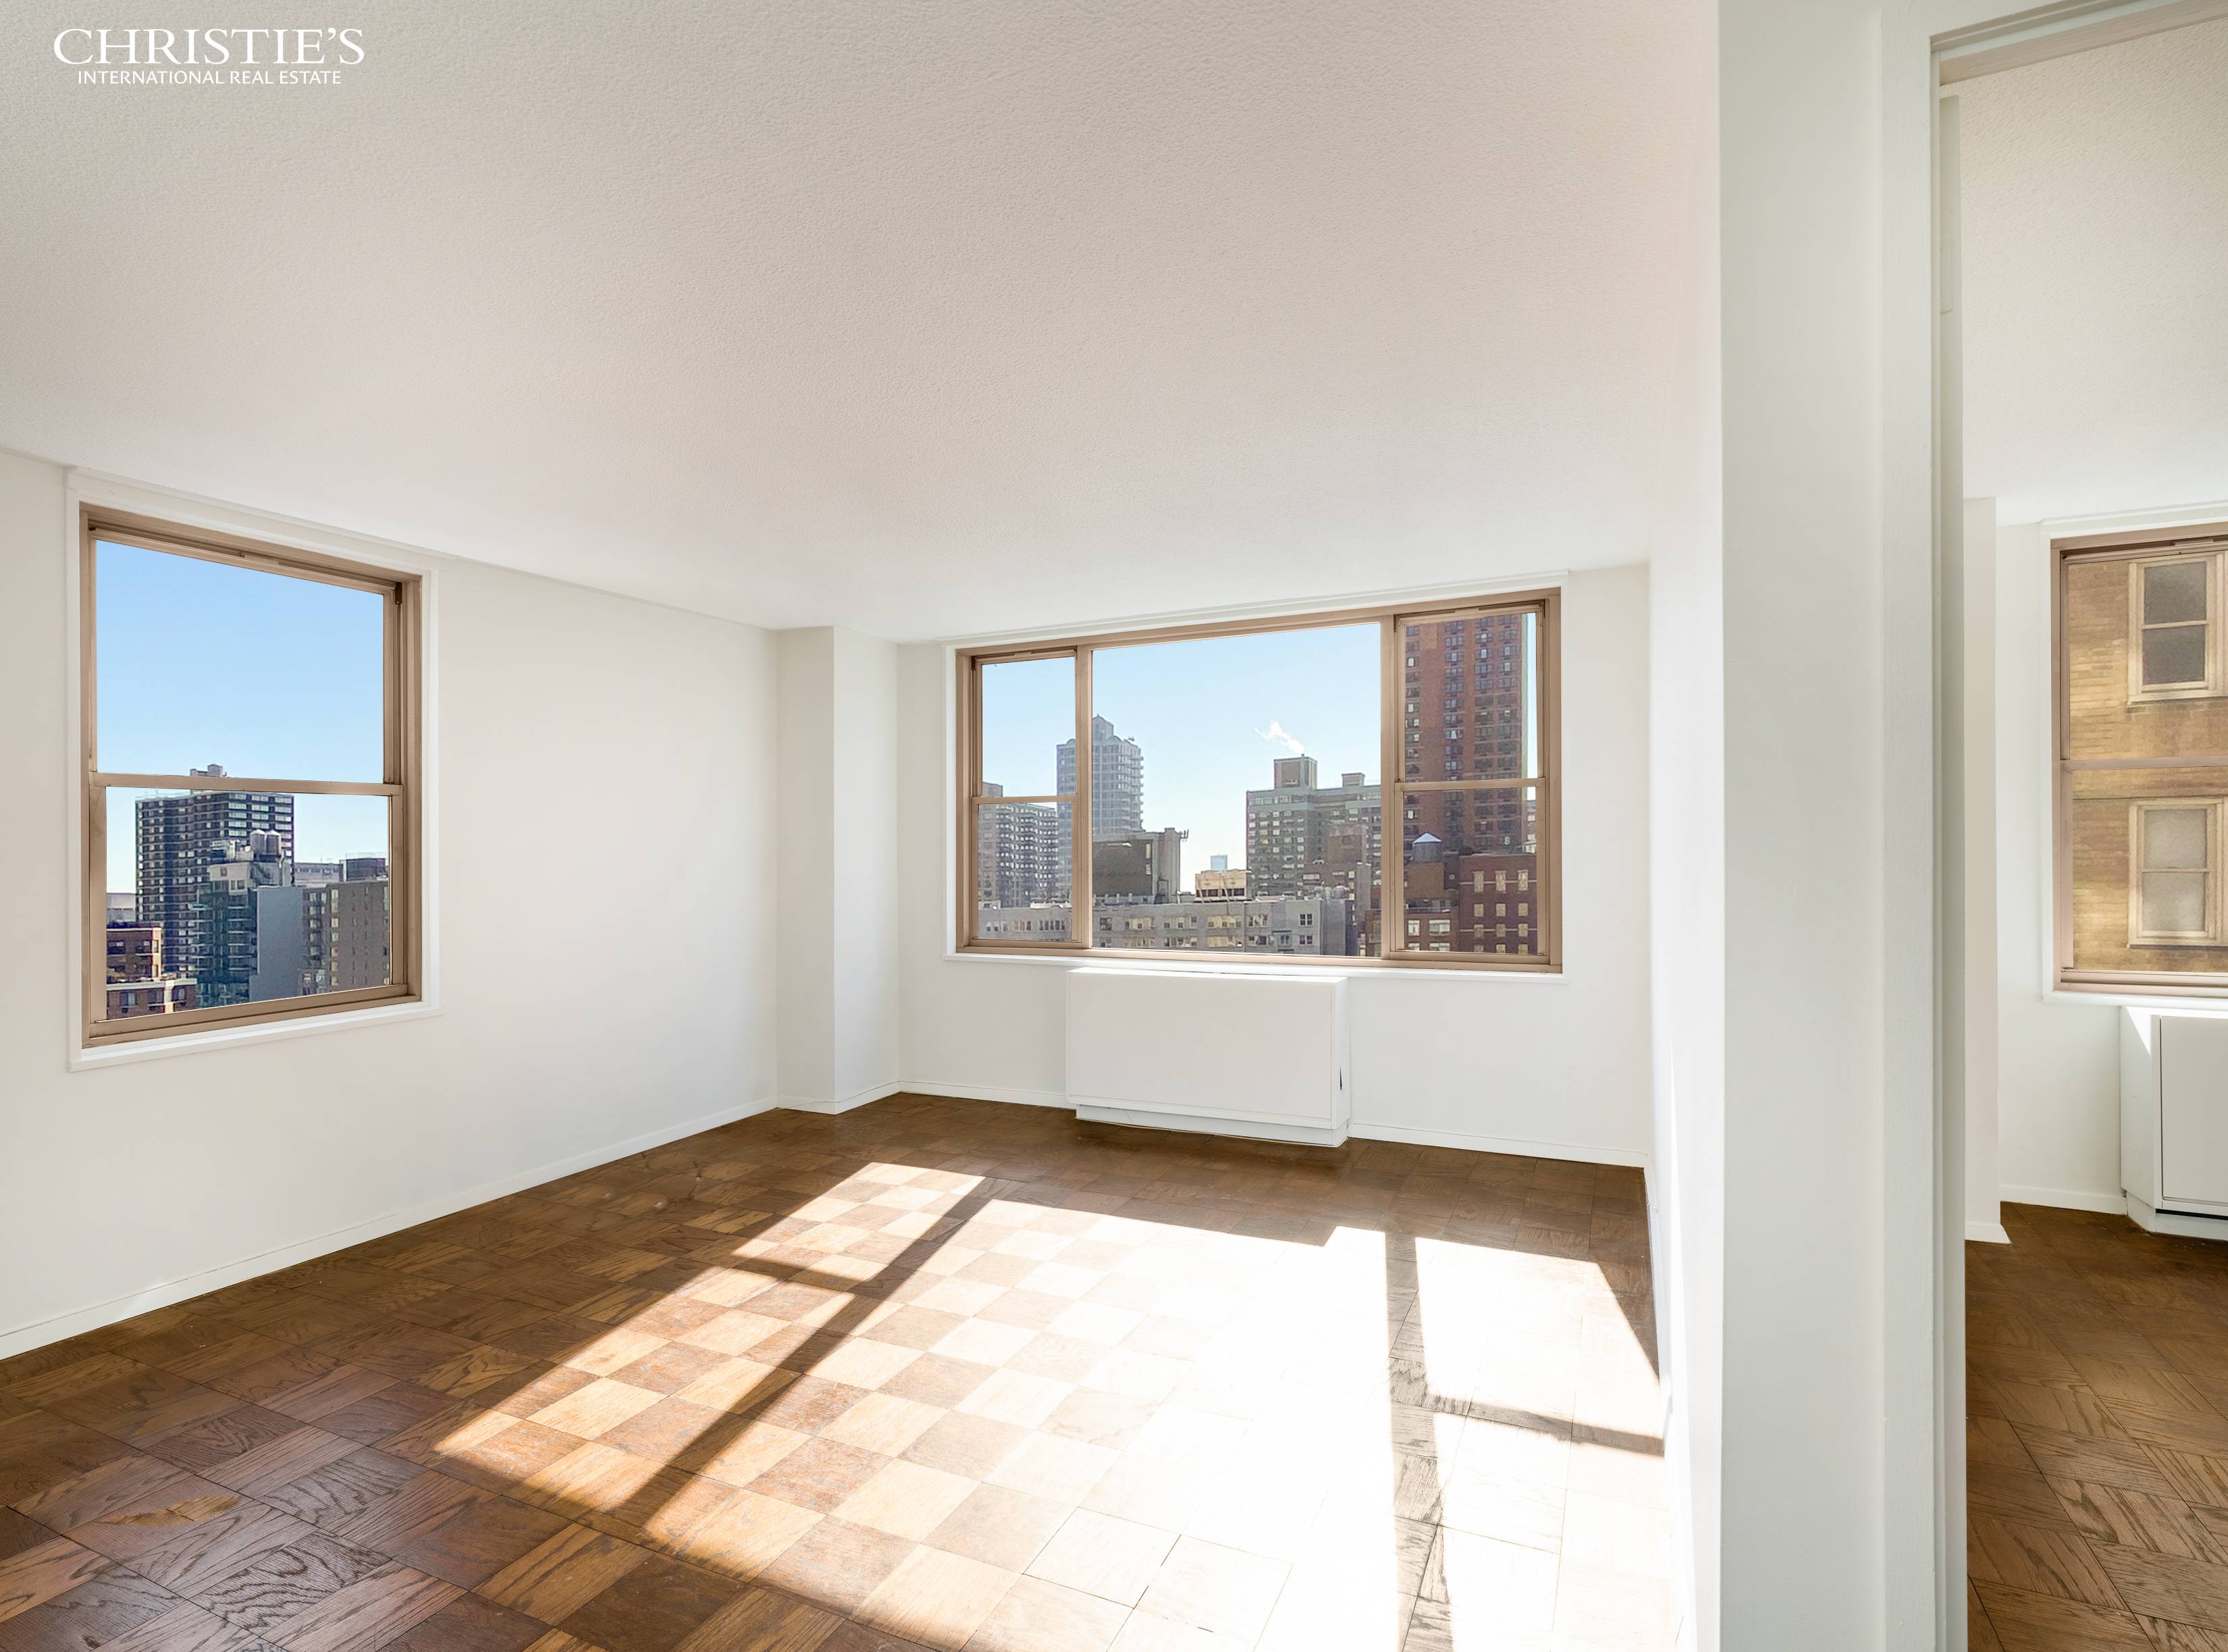 Approx. 870 PPSF ! High floor, Corner 2BD 2BA at The Carlton Regency in Murray Hill for Under 1M !